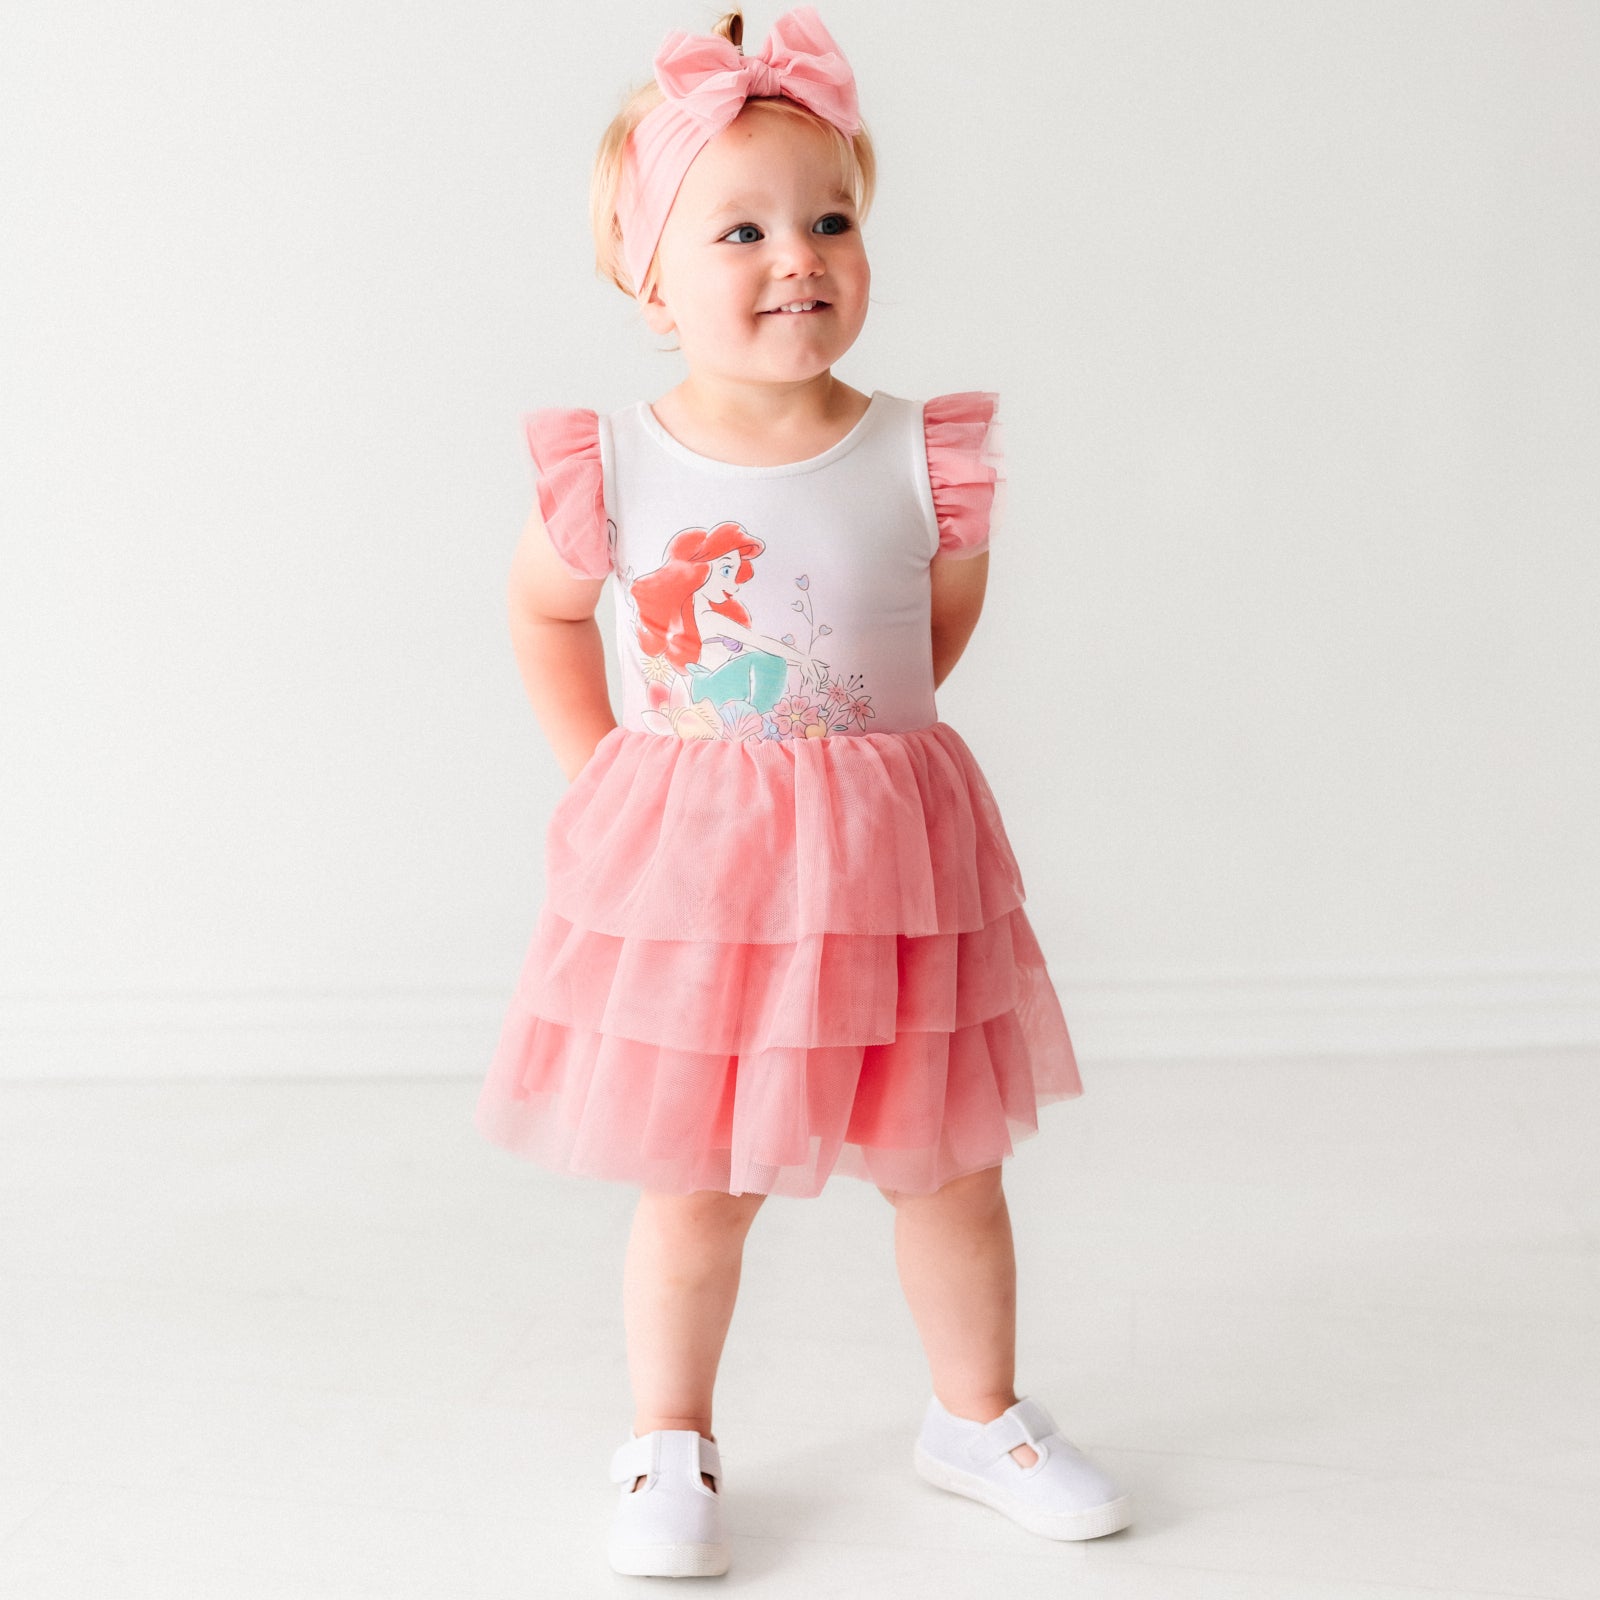 Child wearing a Pink tulle luxe bow headband and matching dress